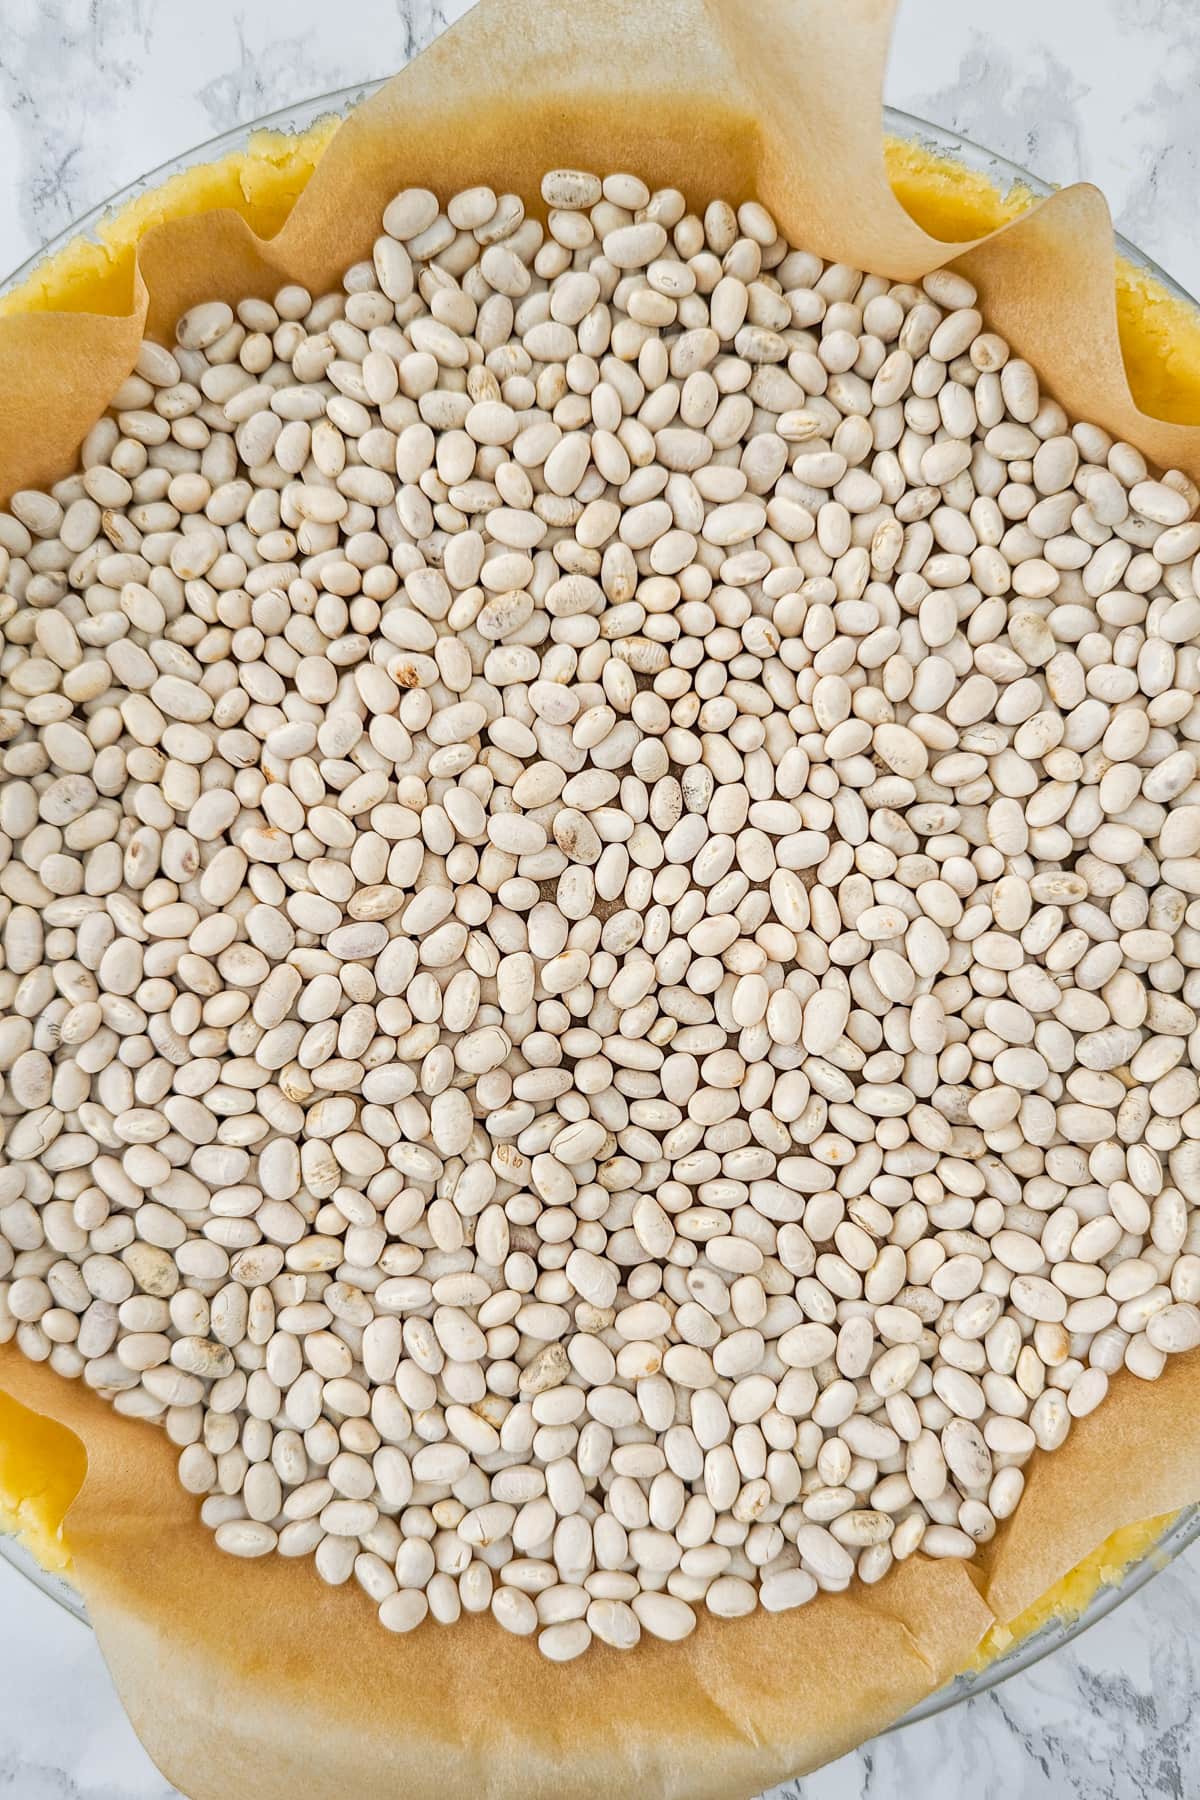 Top view of white beans arranged in a parchment paper in a baking dish.